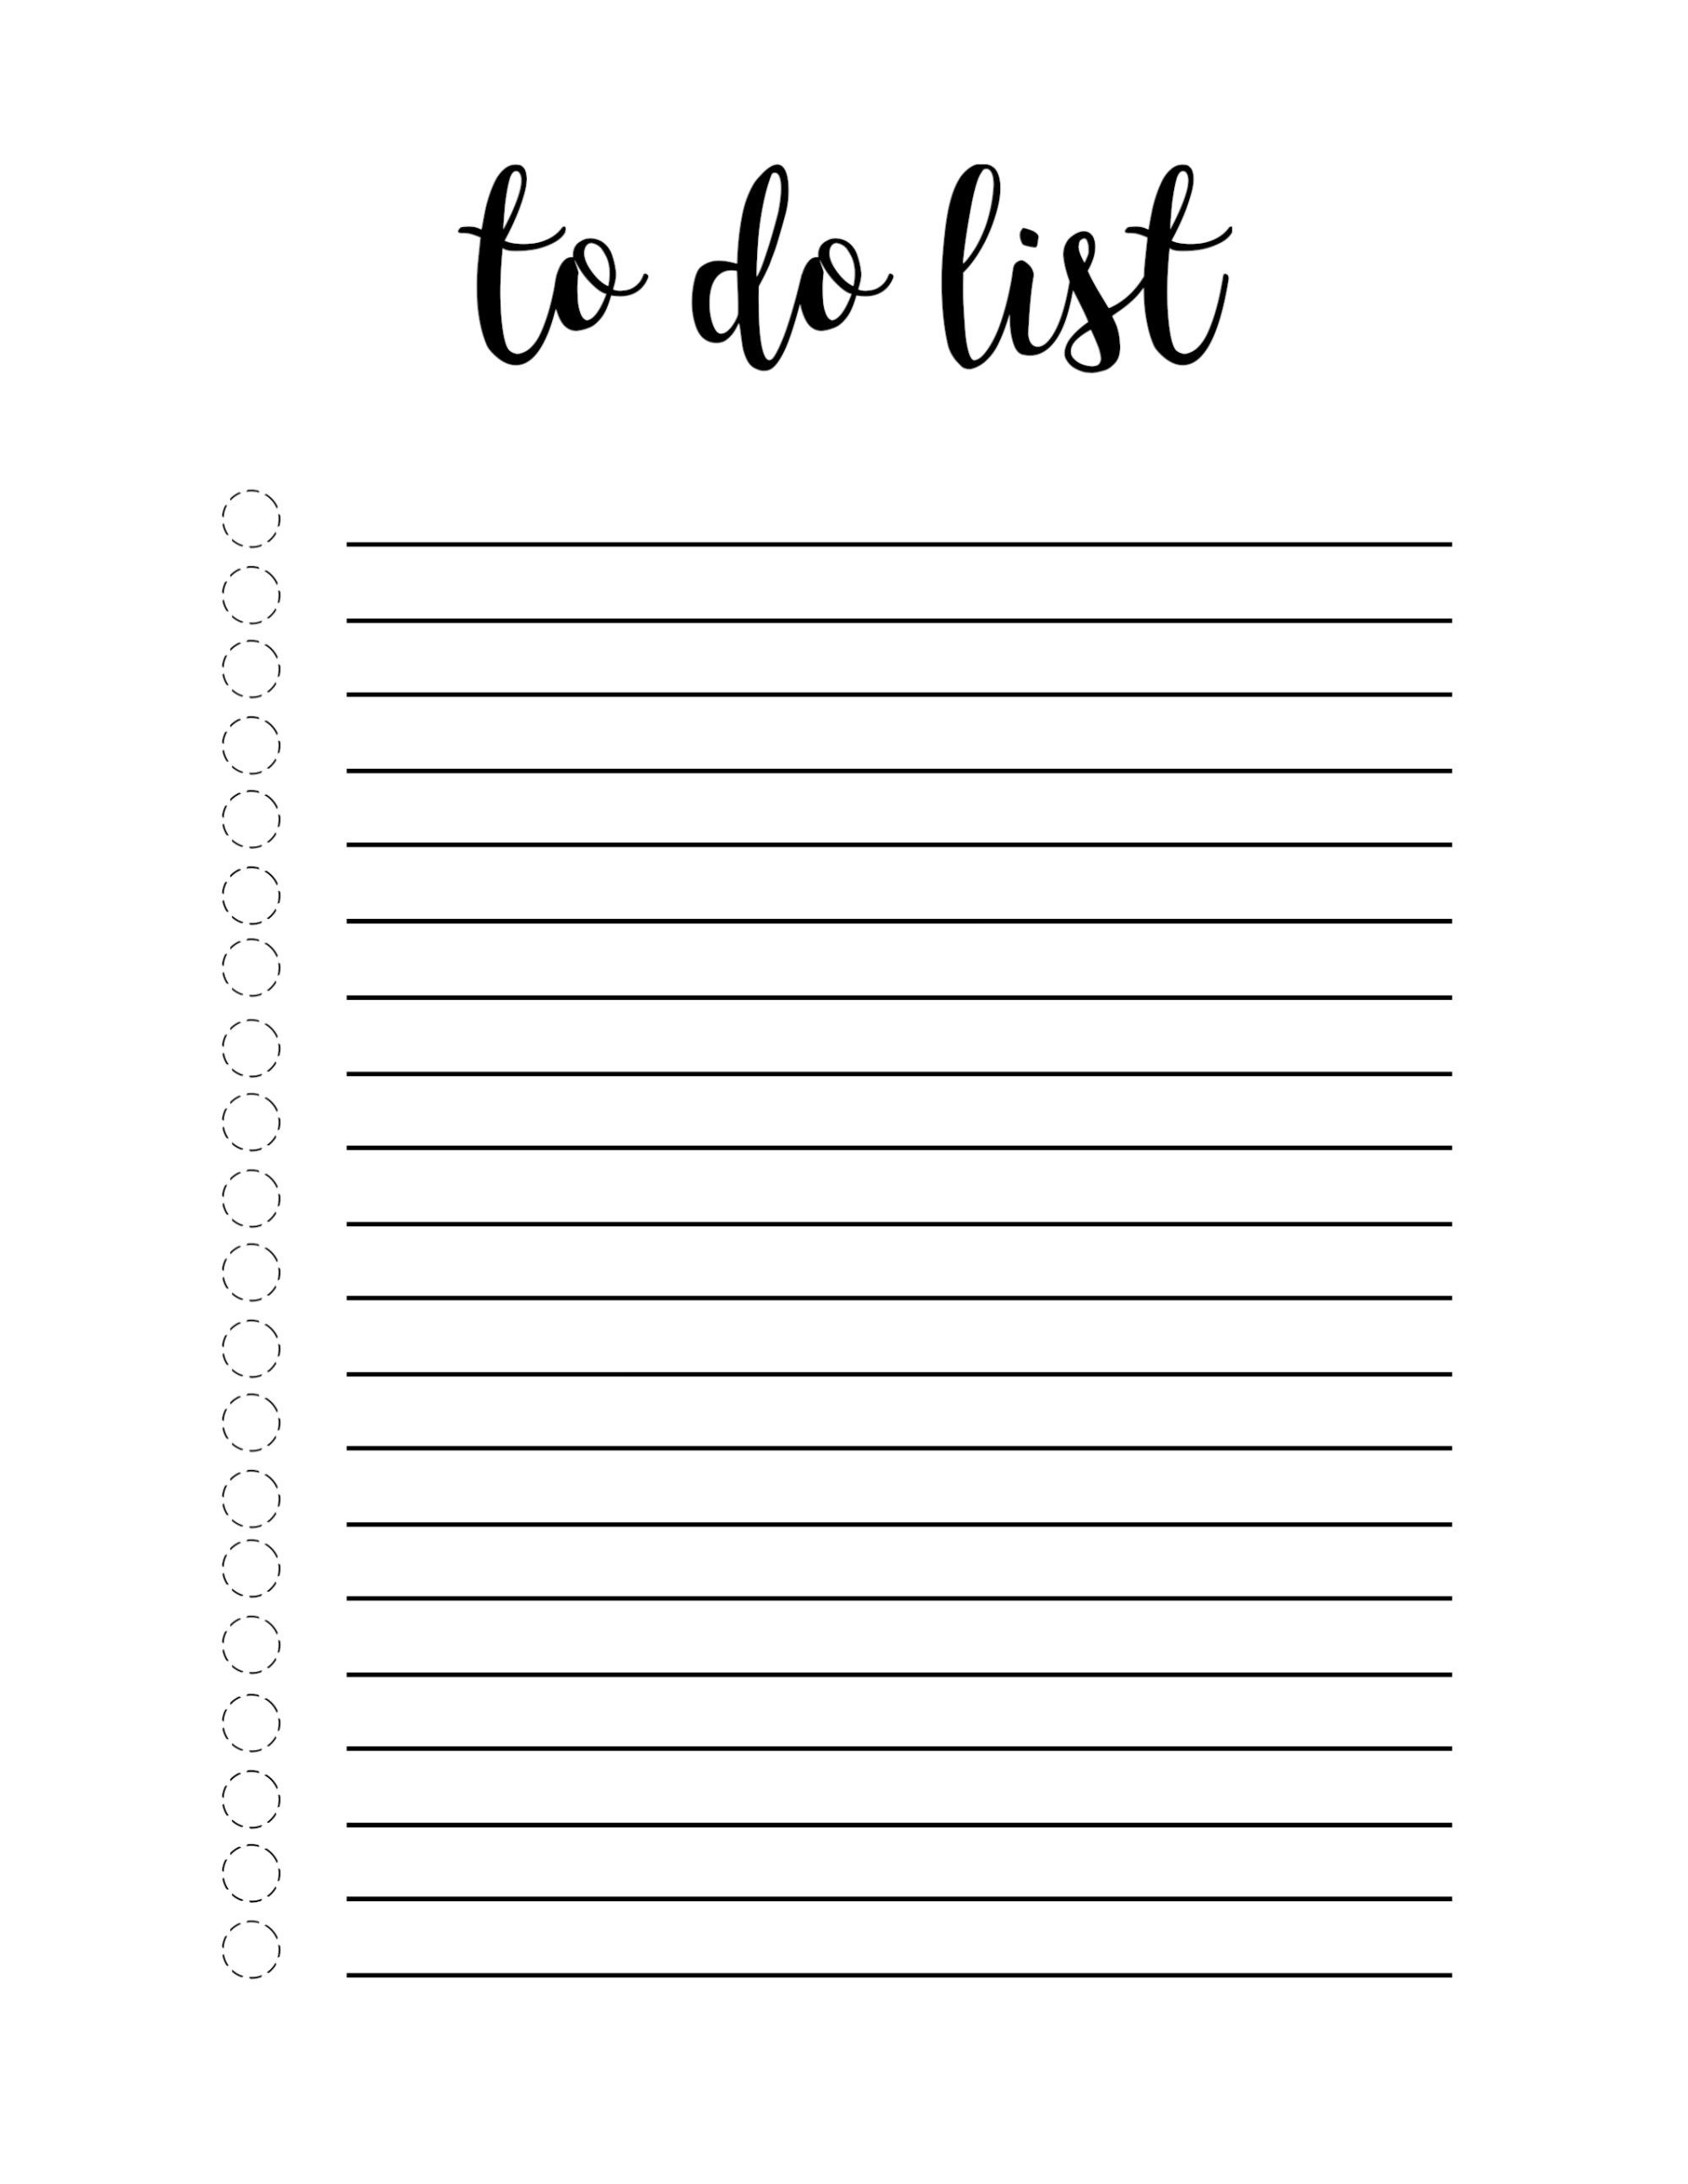 Free Printable To Do List Template | Making Notebooks | To Do - To Do List Free Printable